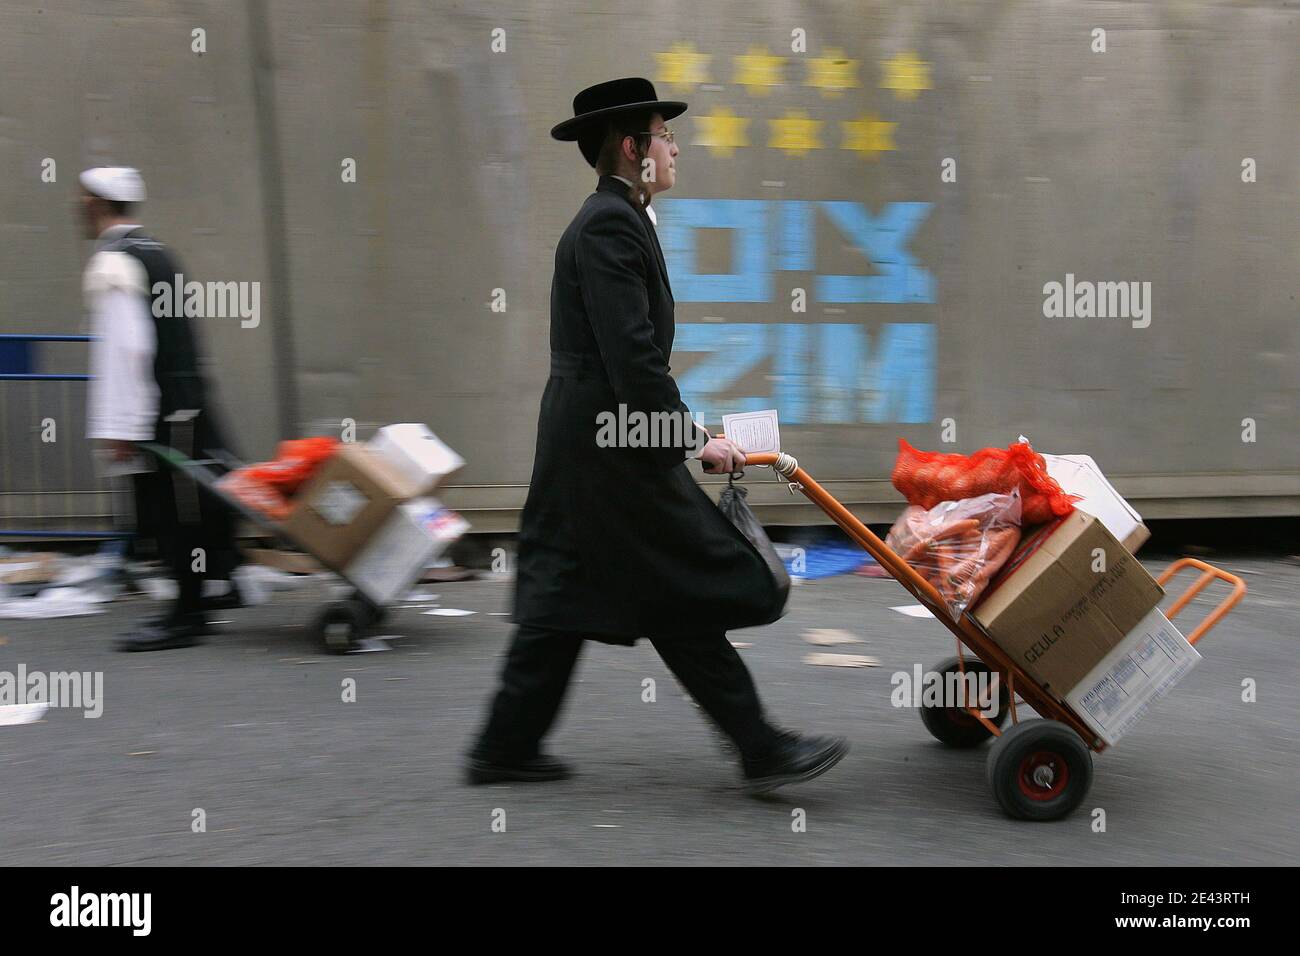 Ultra-Orthodox Jewish men carrie sacks of food for distribution to the needy, for the upcoming Jewish holiday of Passover, in the Mea Shearim neighbourhood of Jerusalem, Israel on April 6, 2009. Passover commemorates the flight of Jews from Ancient Egypt as described in Exodus. According to the account, the Jews did not have time to prepare leavened bread before fleeing to the Promised Land. Photo by Olivier Fitoussi/ABACAPRESS.COM Stock Photo